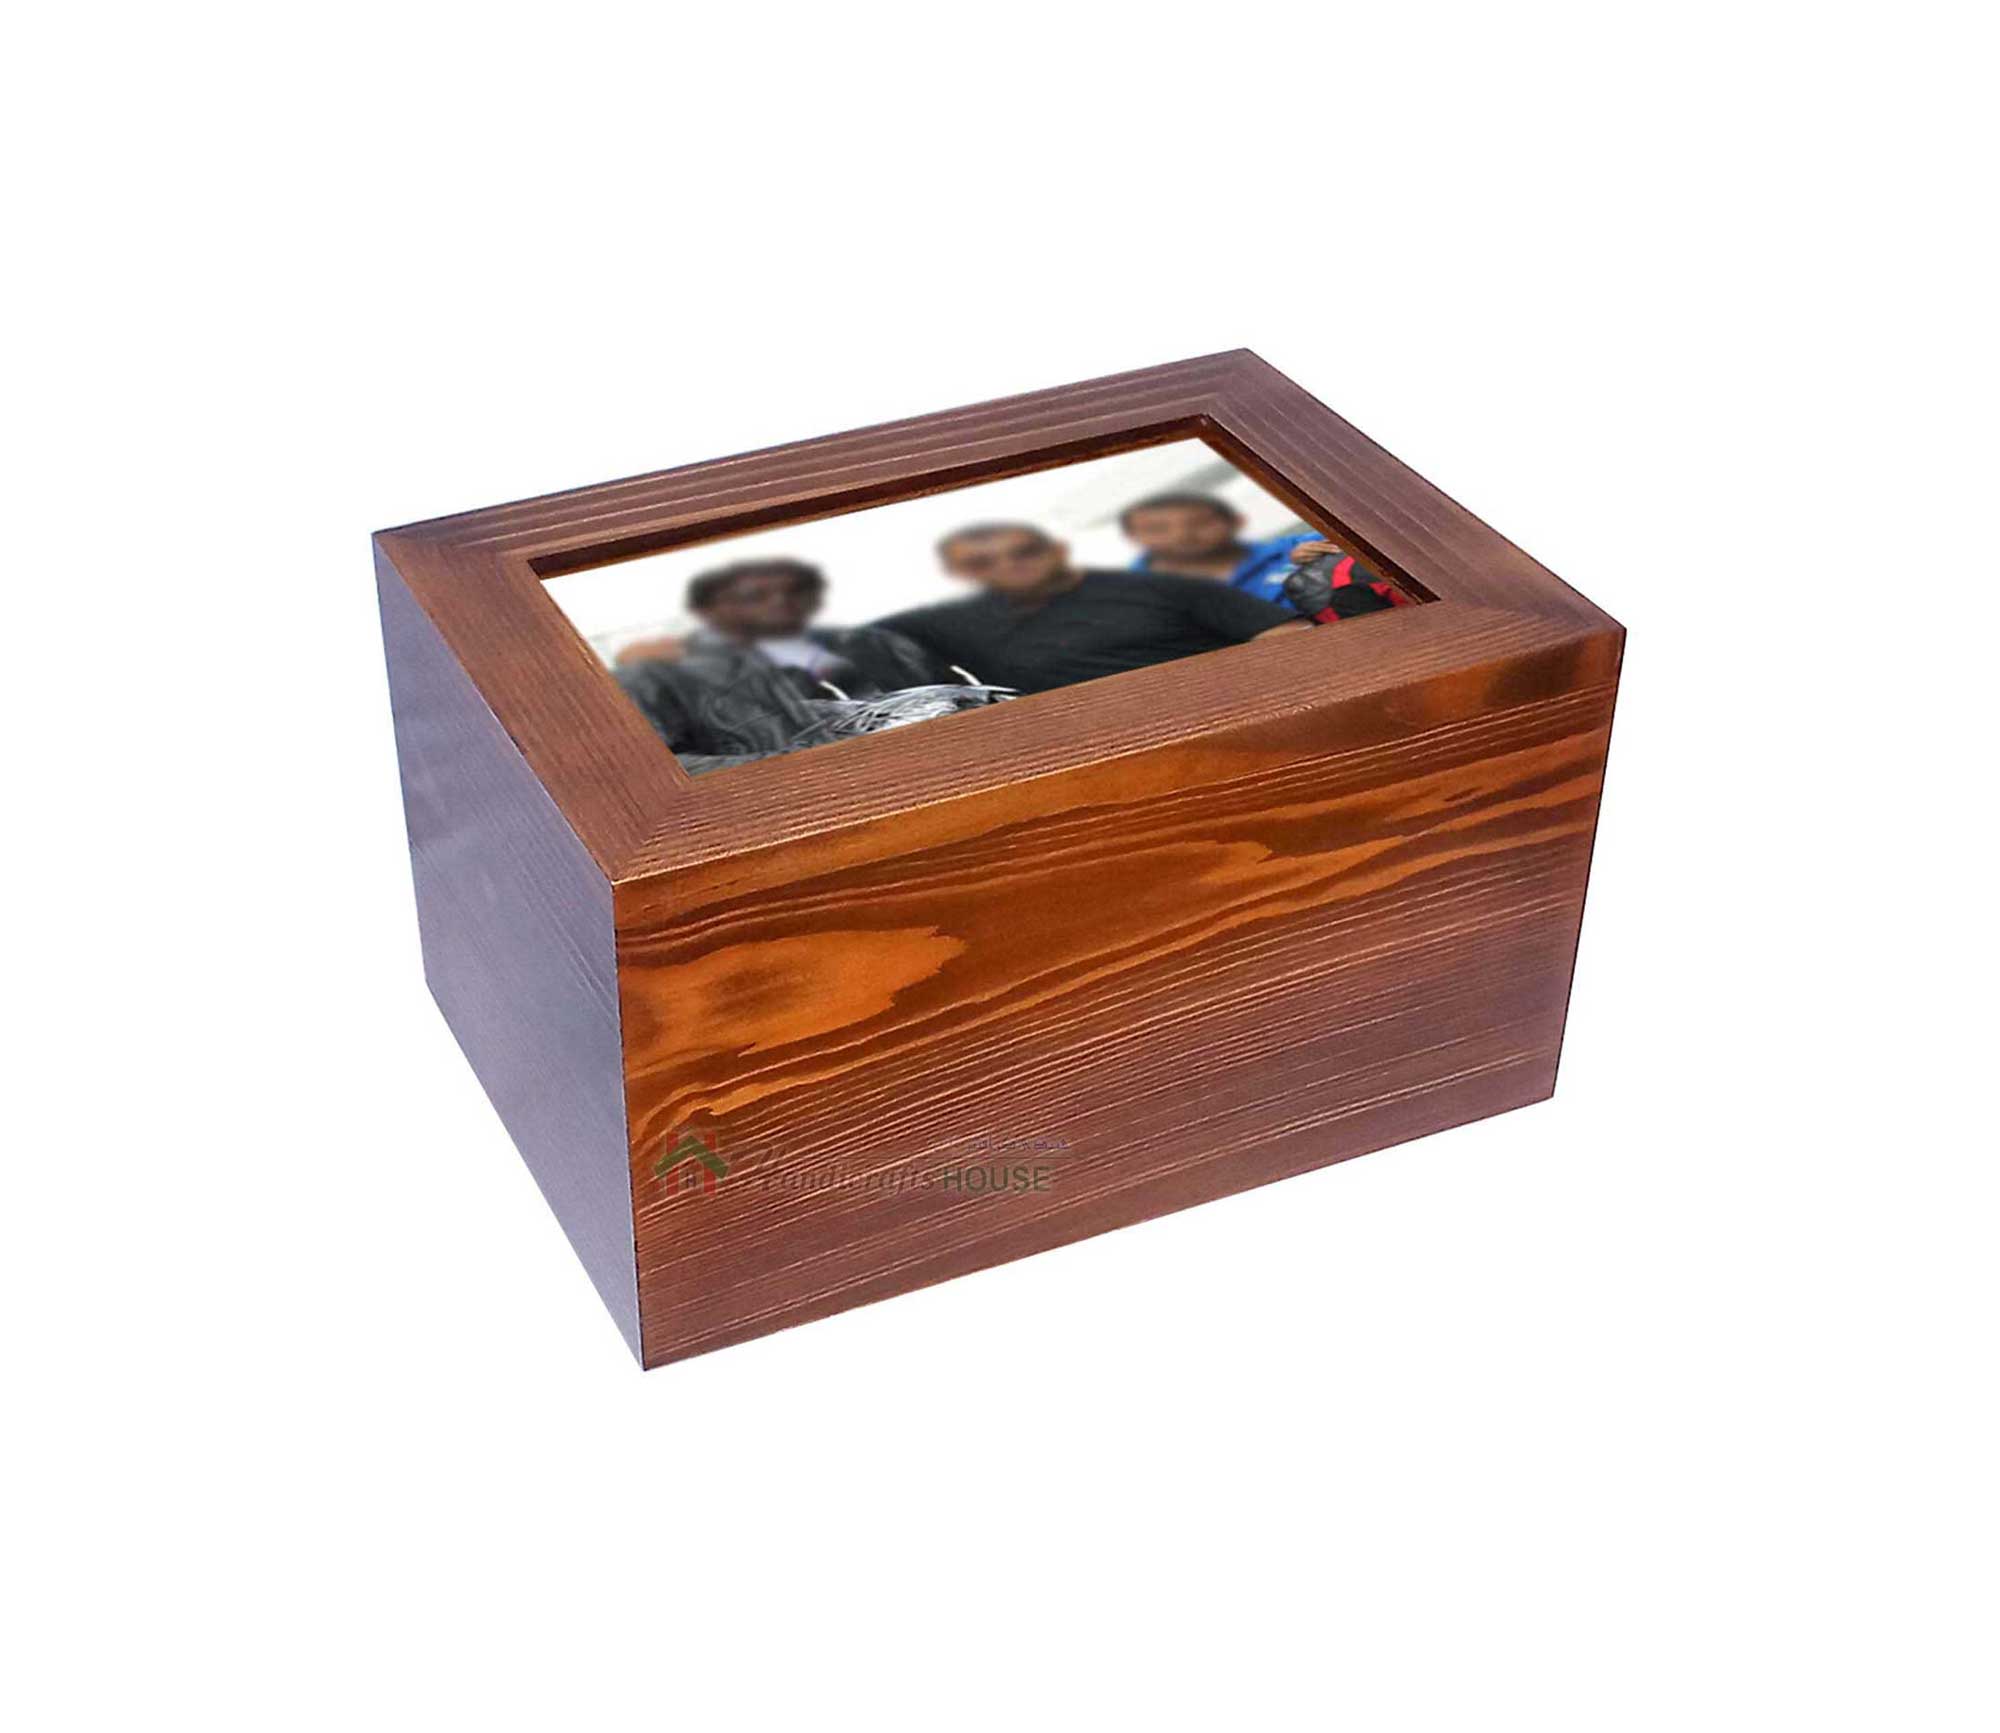 Wood Funeral Urn For Ashes, Wooden Adult Boxes, Decorative keepsake, Burial Timber Photo Urns